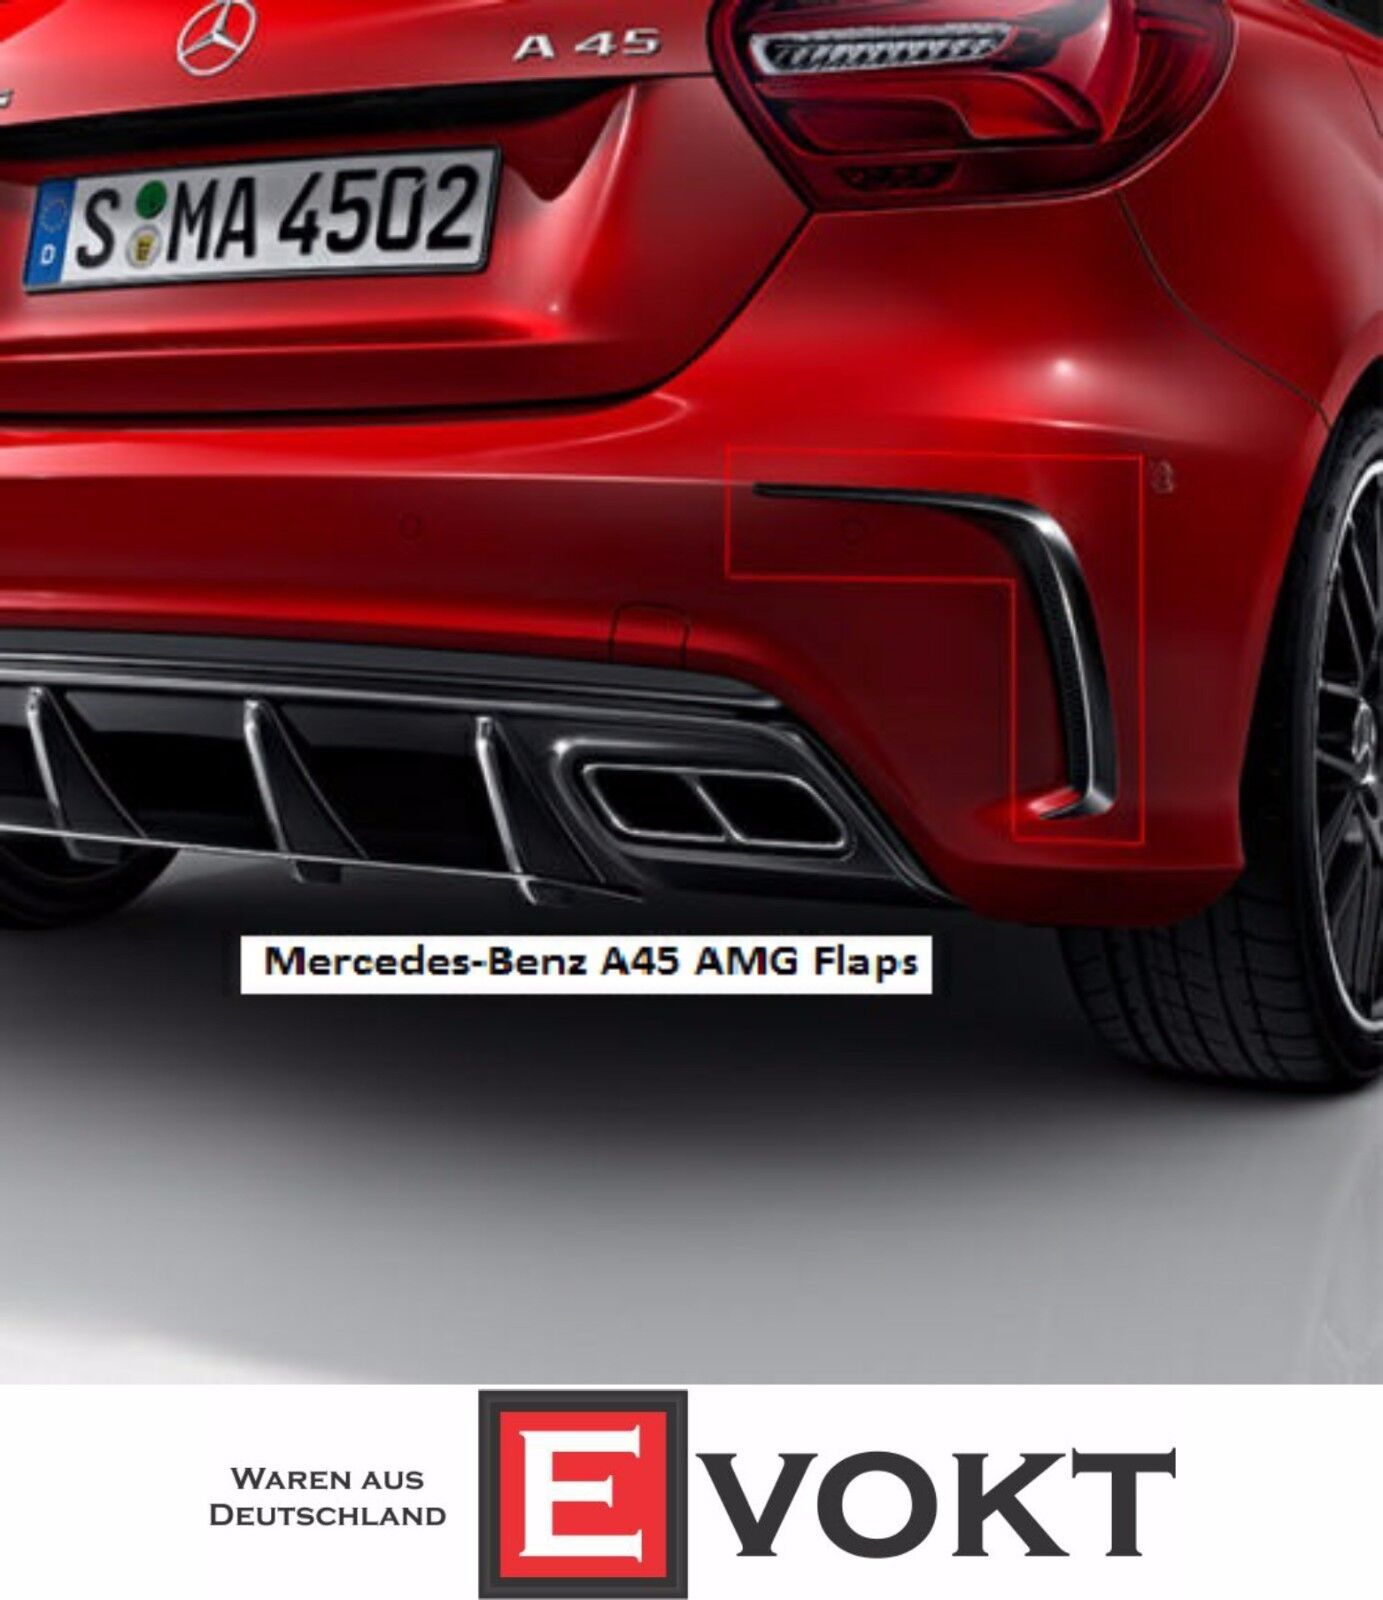 Genuine Mercedes-Benz A45 AMG Flaps Flics Aero Package A-Class W176 Facelift 